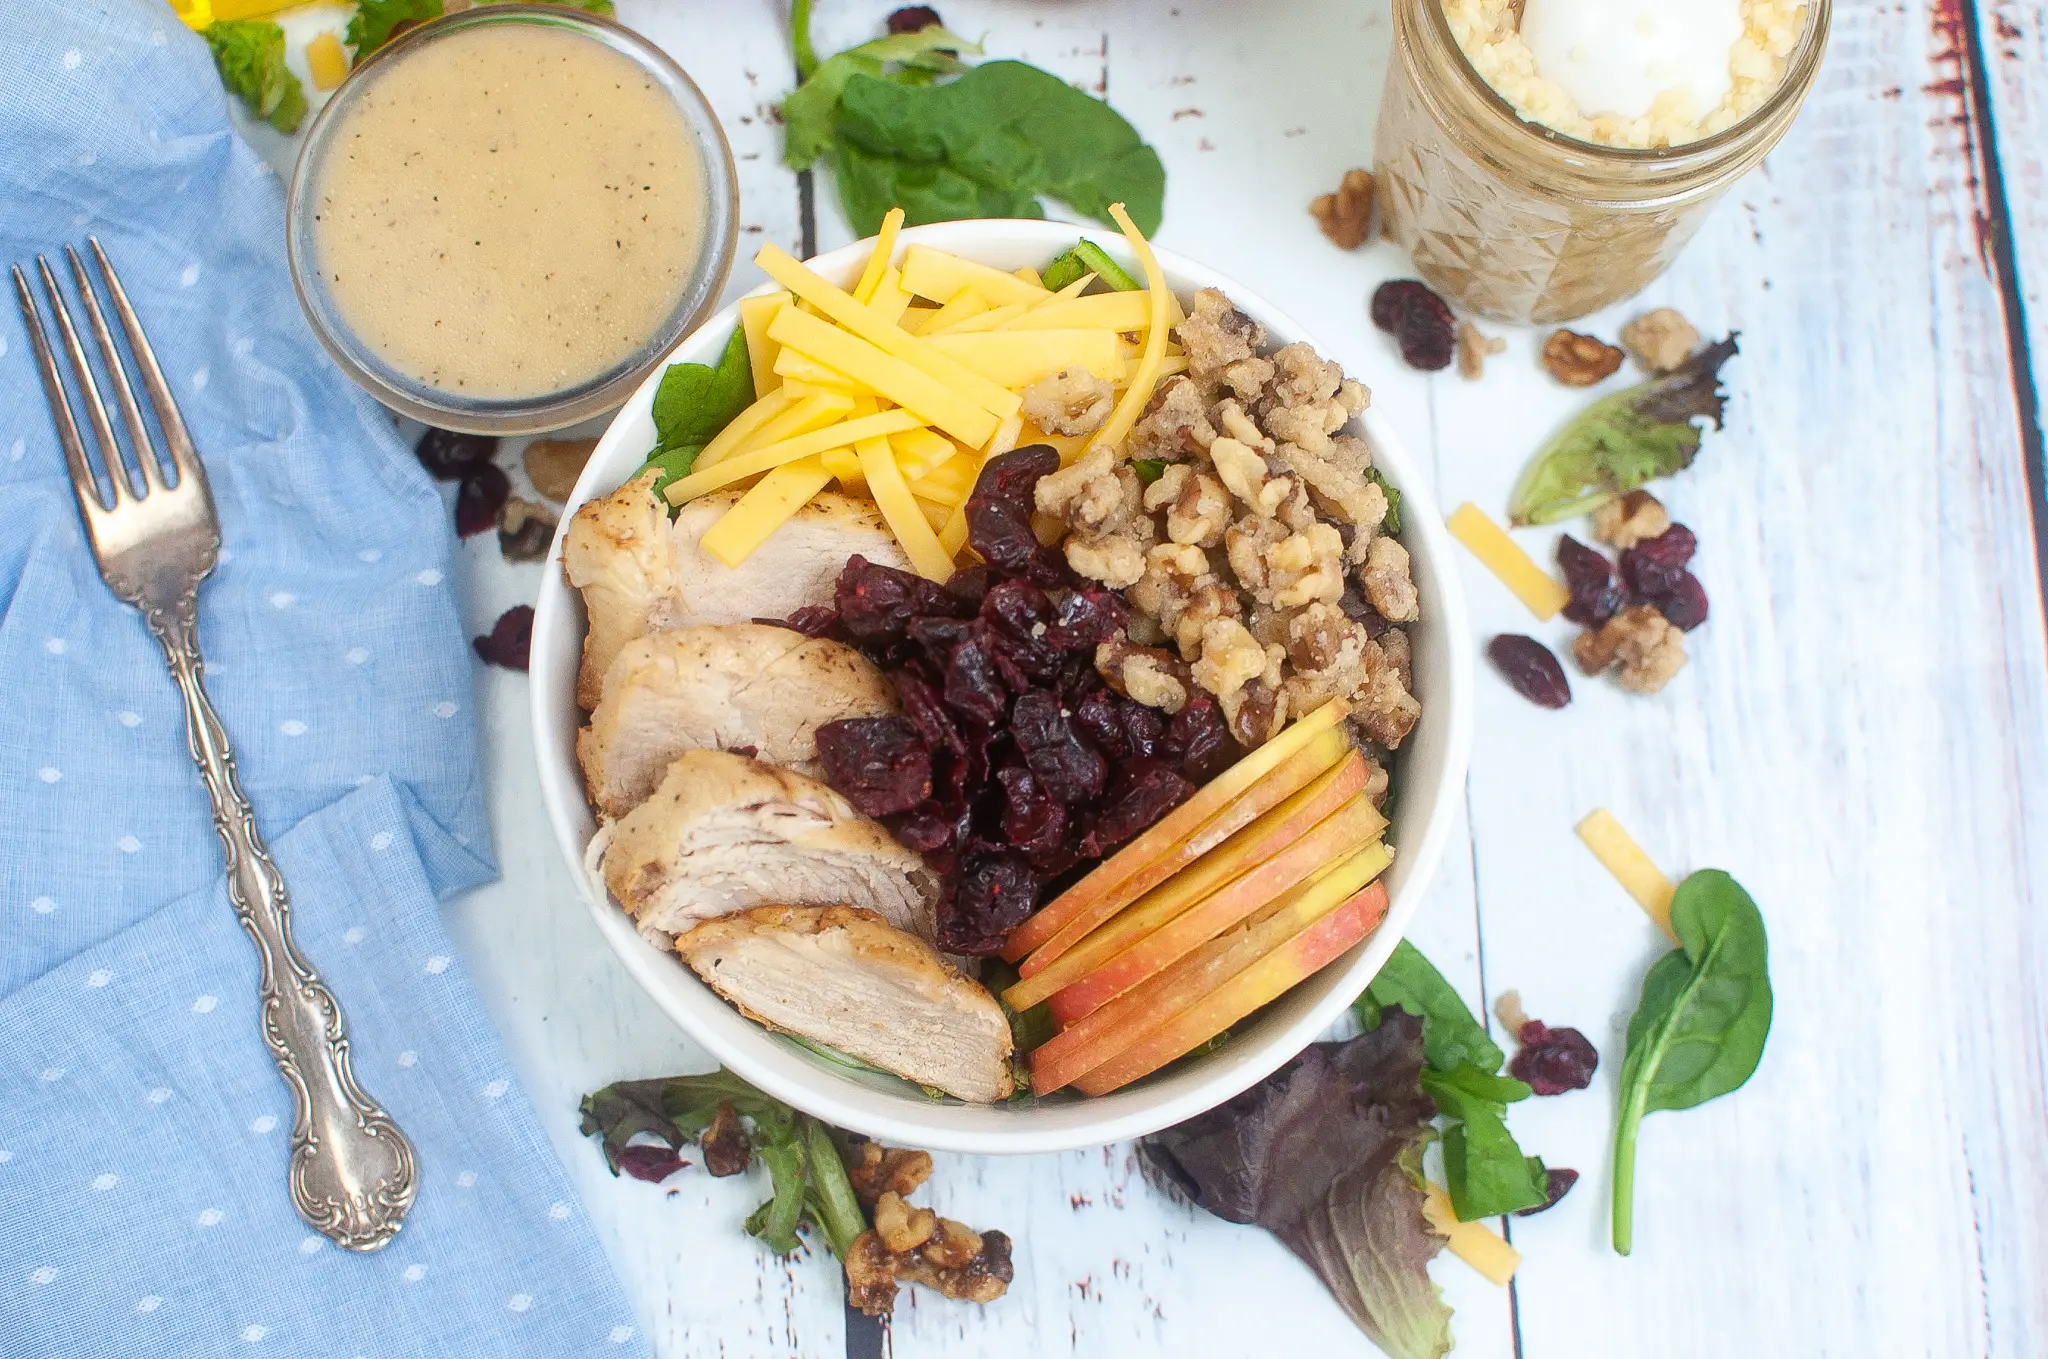 Chicken Salad with Candied Walnuts, Gouda, Apples, and Apple Cider Vinaigrette Dressing